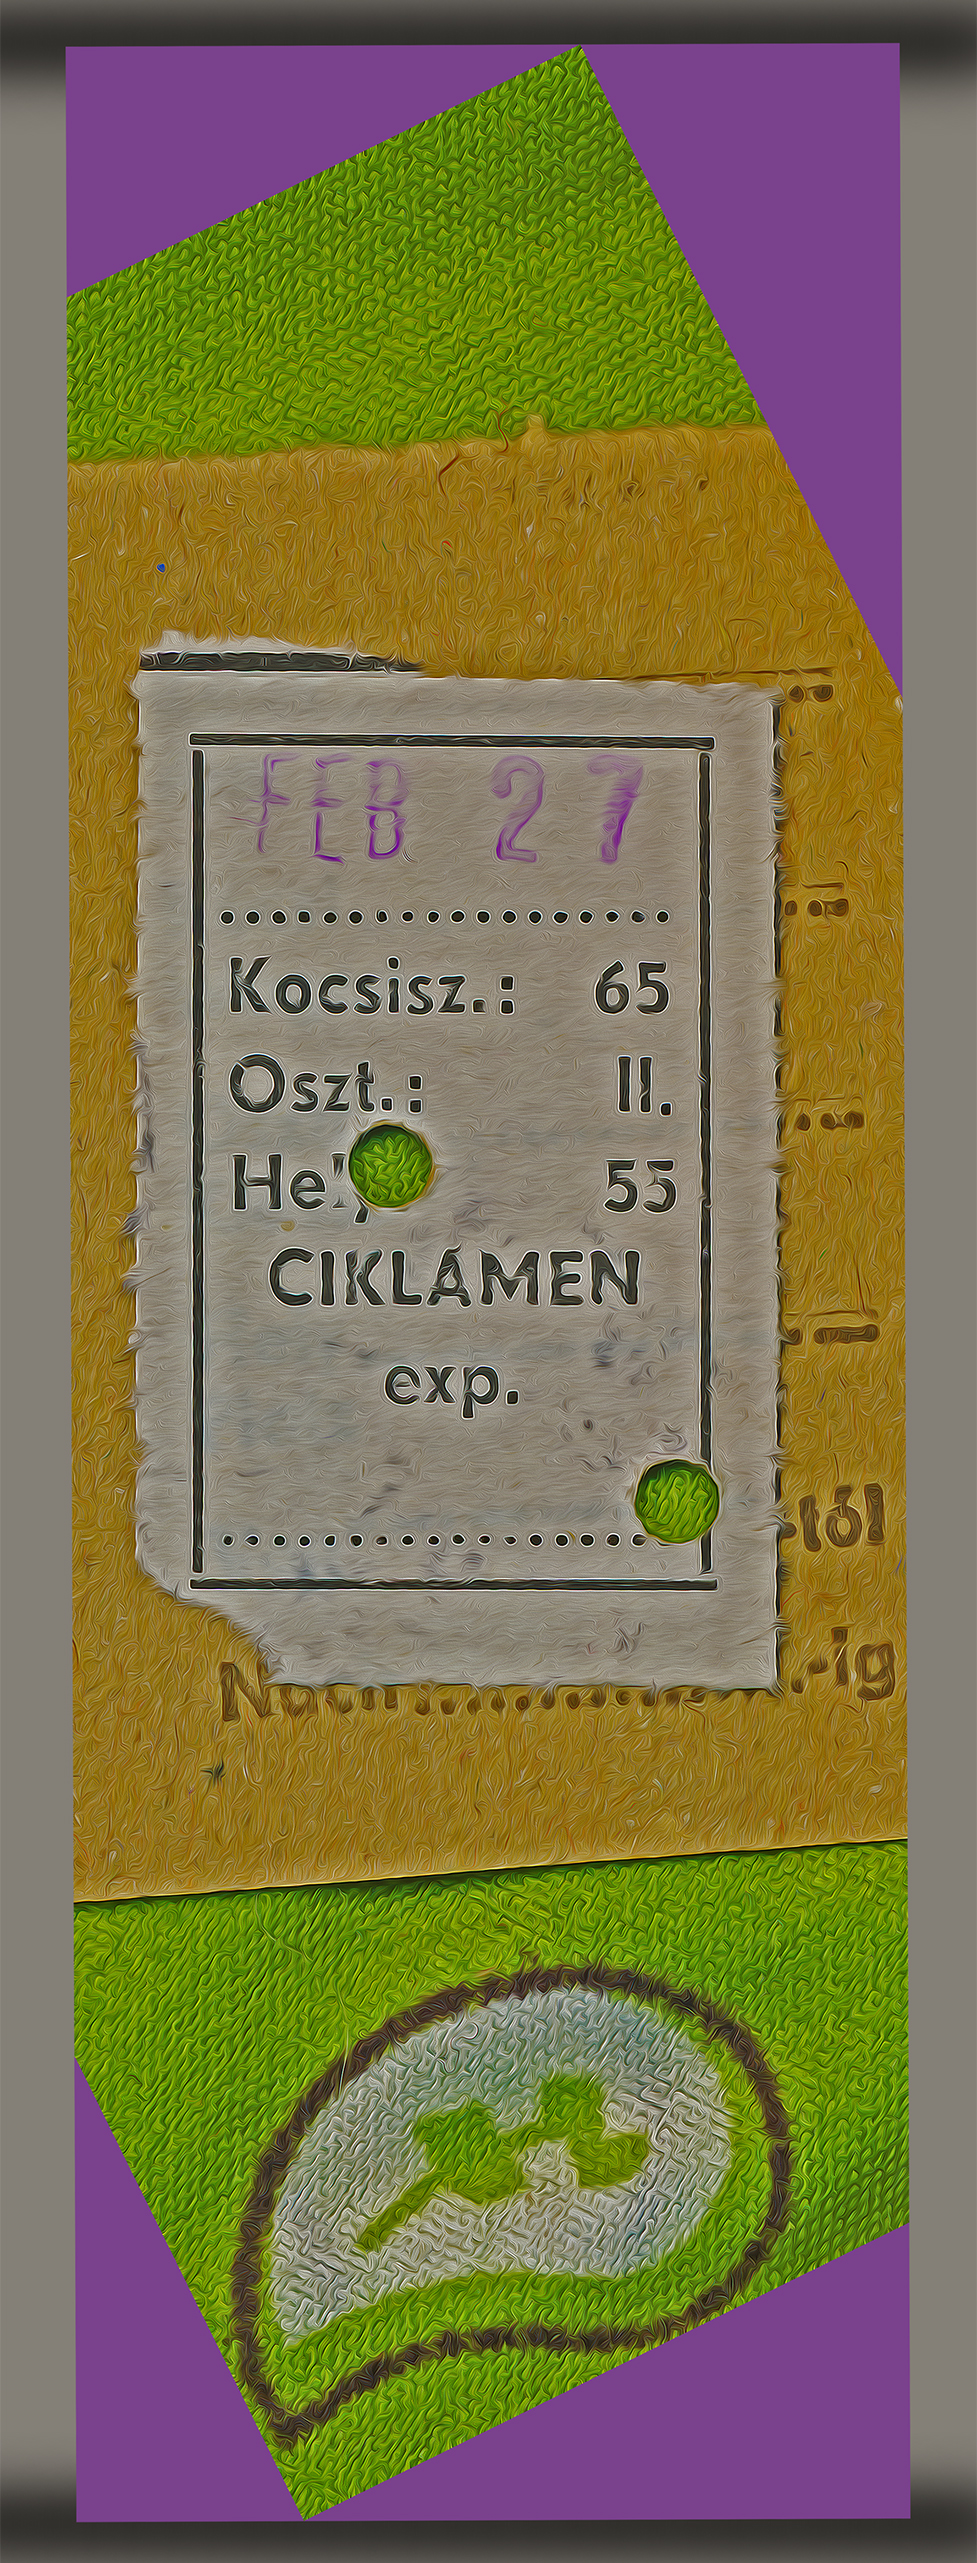 a ticket from February 27 1991 for a ride on the famous Hungarian Ciklaman Express from Gyor to Budapest and return